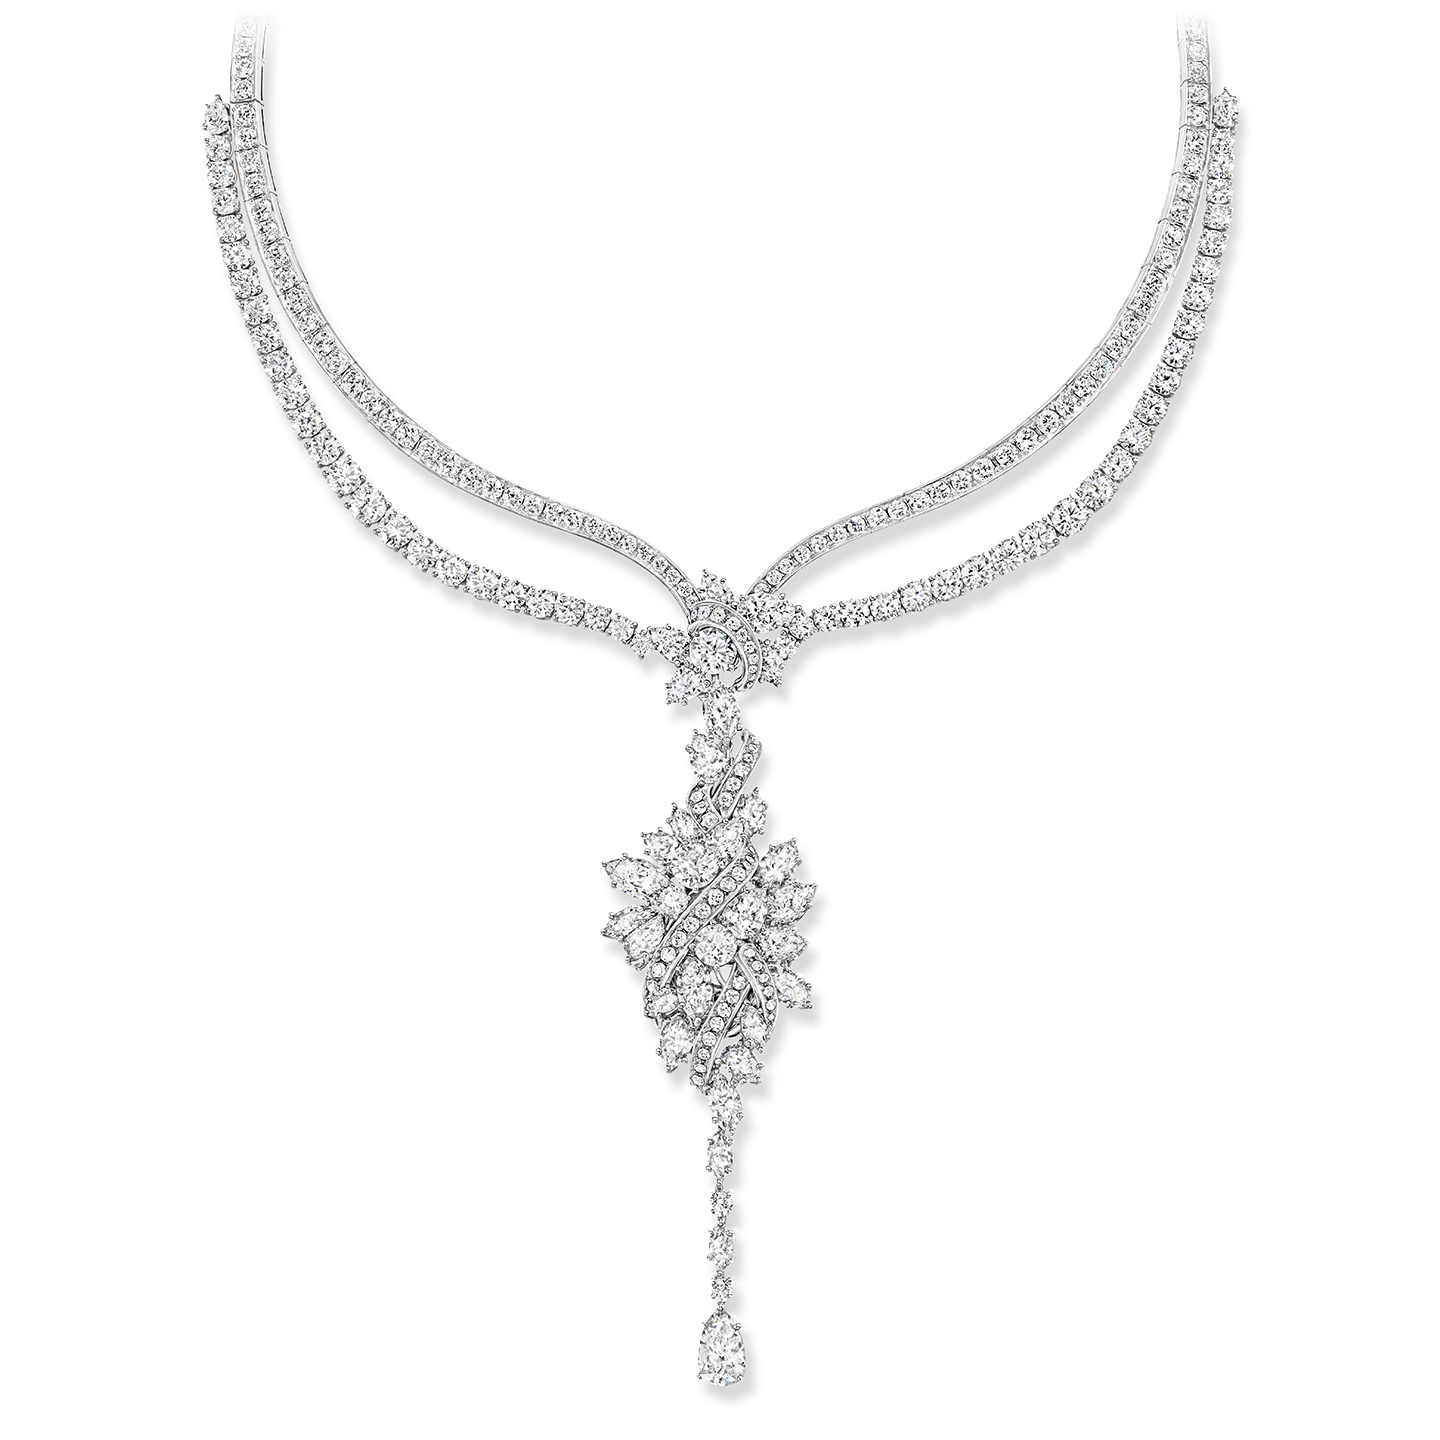 A necklace with 530 marquise, pear-shaped and round brilliant diamonds weighing a total of approximately 81.85 carats, set in platinum. 
The necklace's featured cluster pendant is a locket. Other elements of the necklace may be worn in seven different configurations.